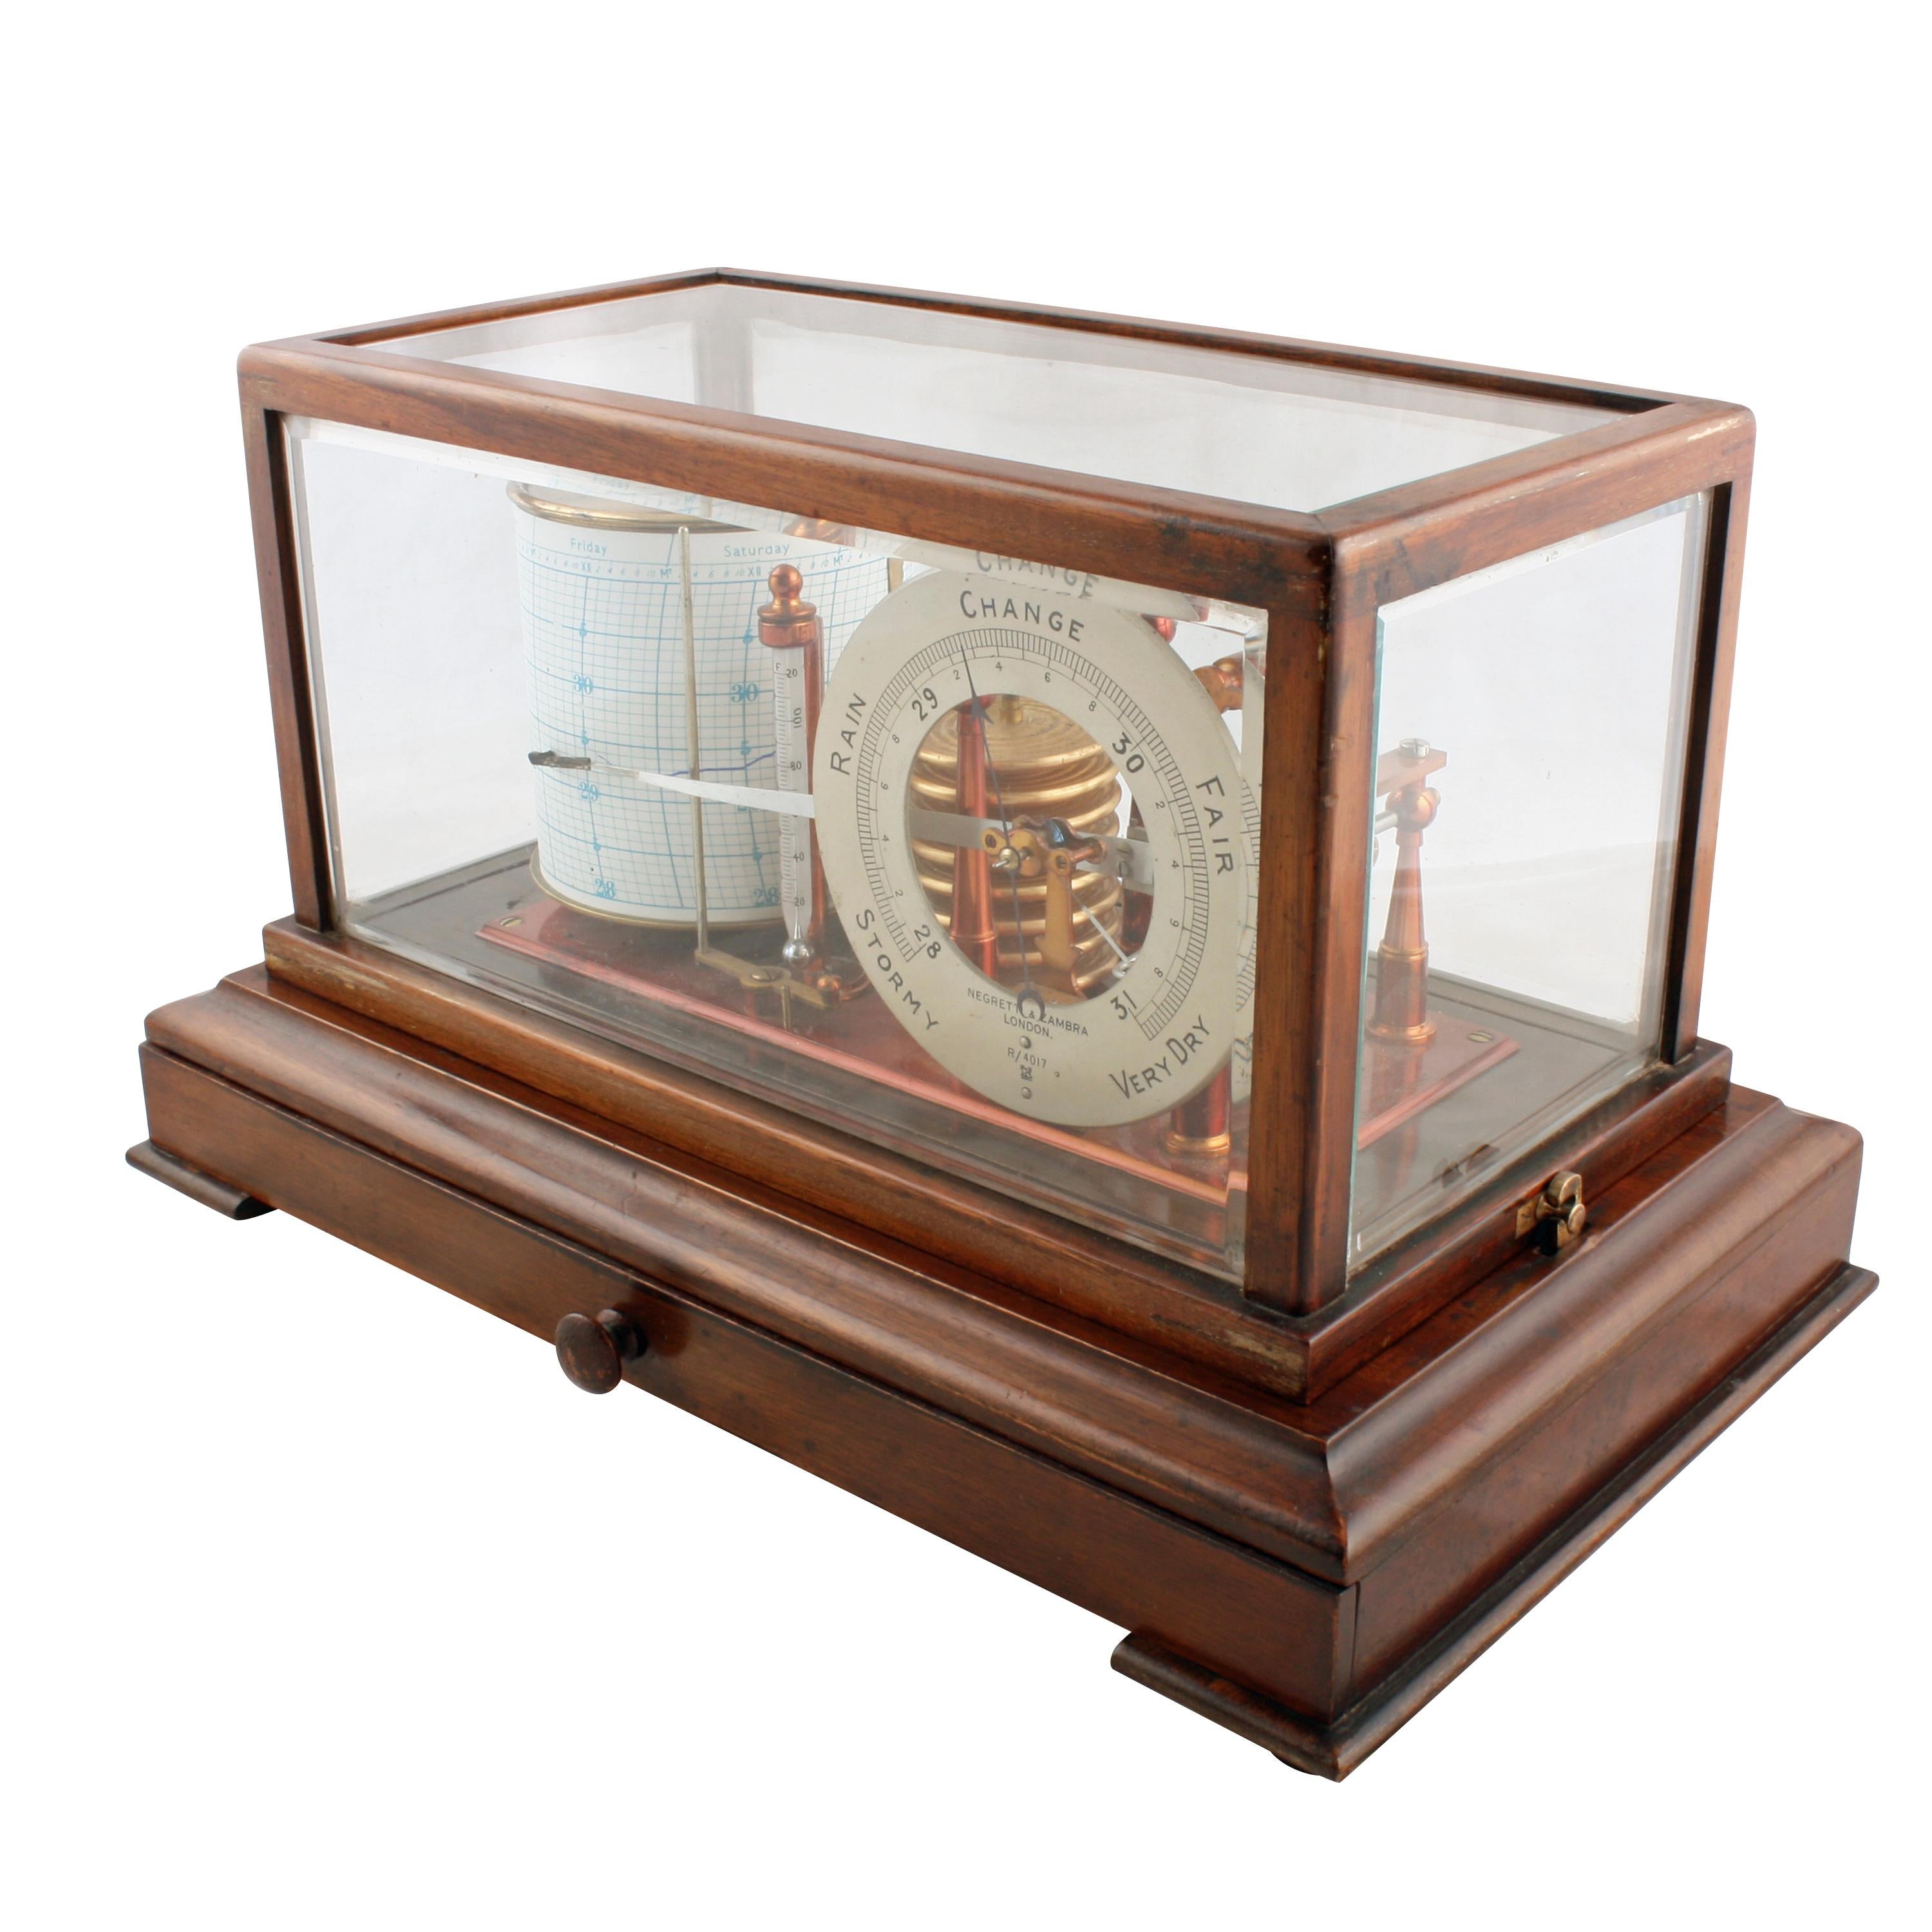 An early 20th century glazed mahogany cased barograph by Negretti & Zambra.

The barograph has a clockwork revolving cylinder with recording paper and a barometric pressure viewing dial.

The interior also holds a brass and glass thermometer and